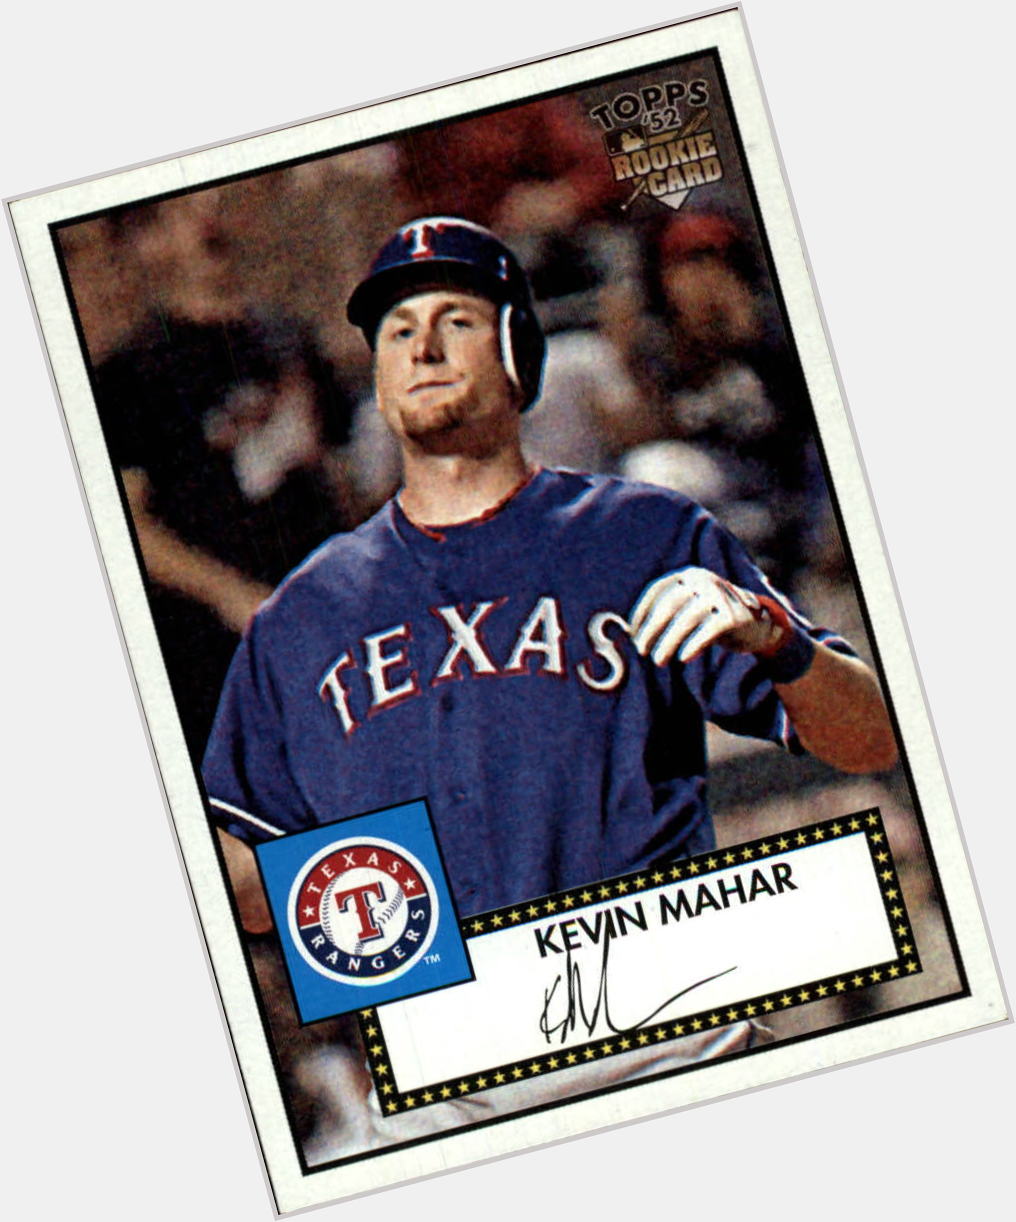 Happy Birthday to former outfielder Kevin Mahar. 